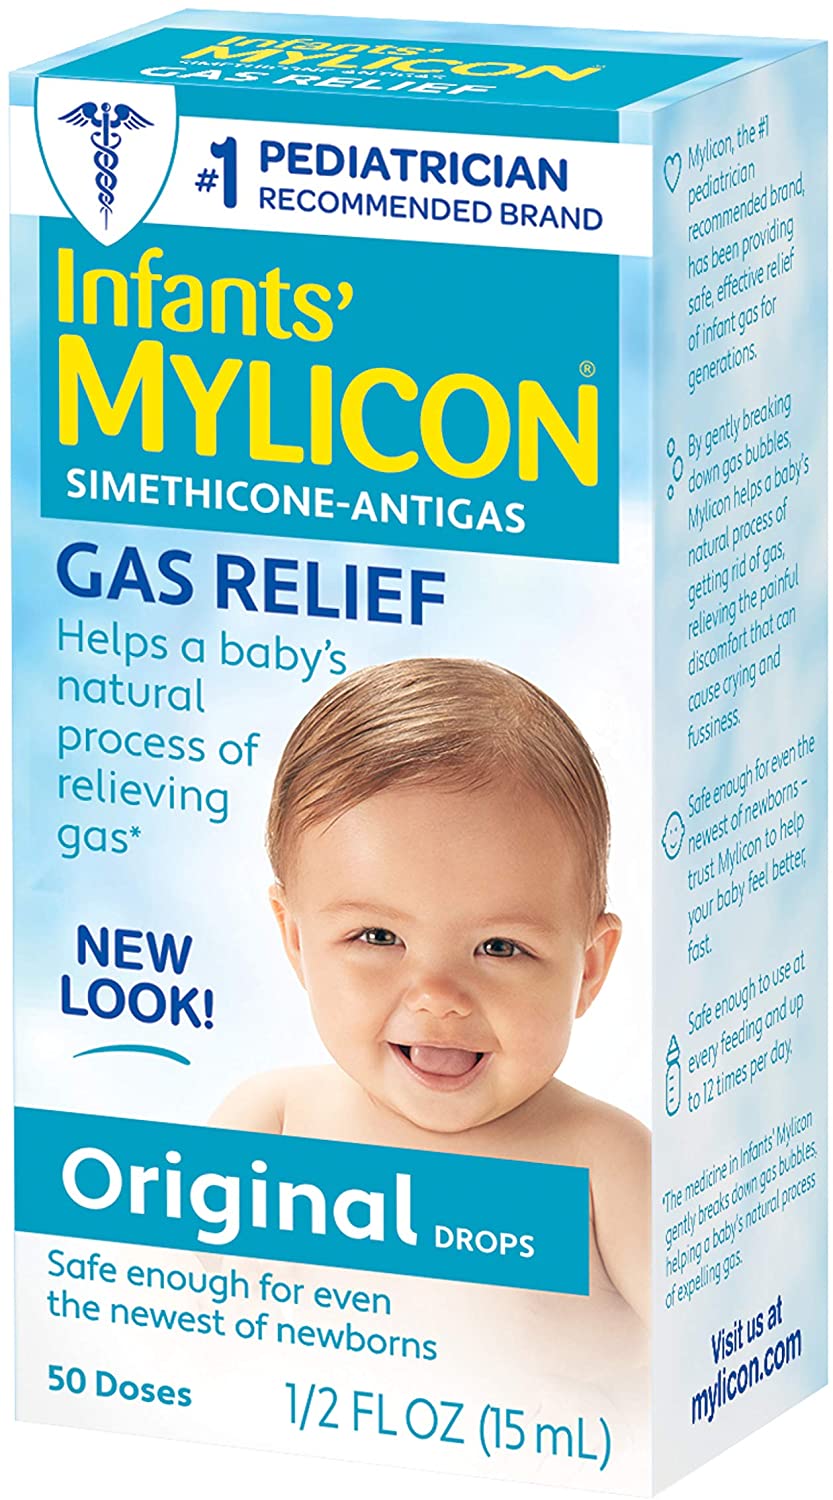 Can Mylicon Drops Cause Constipation